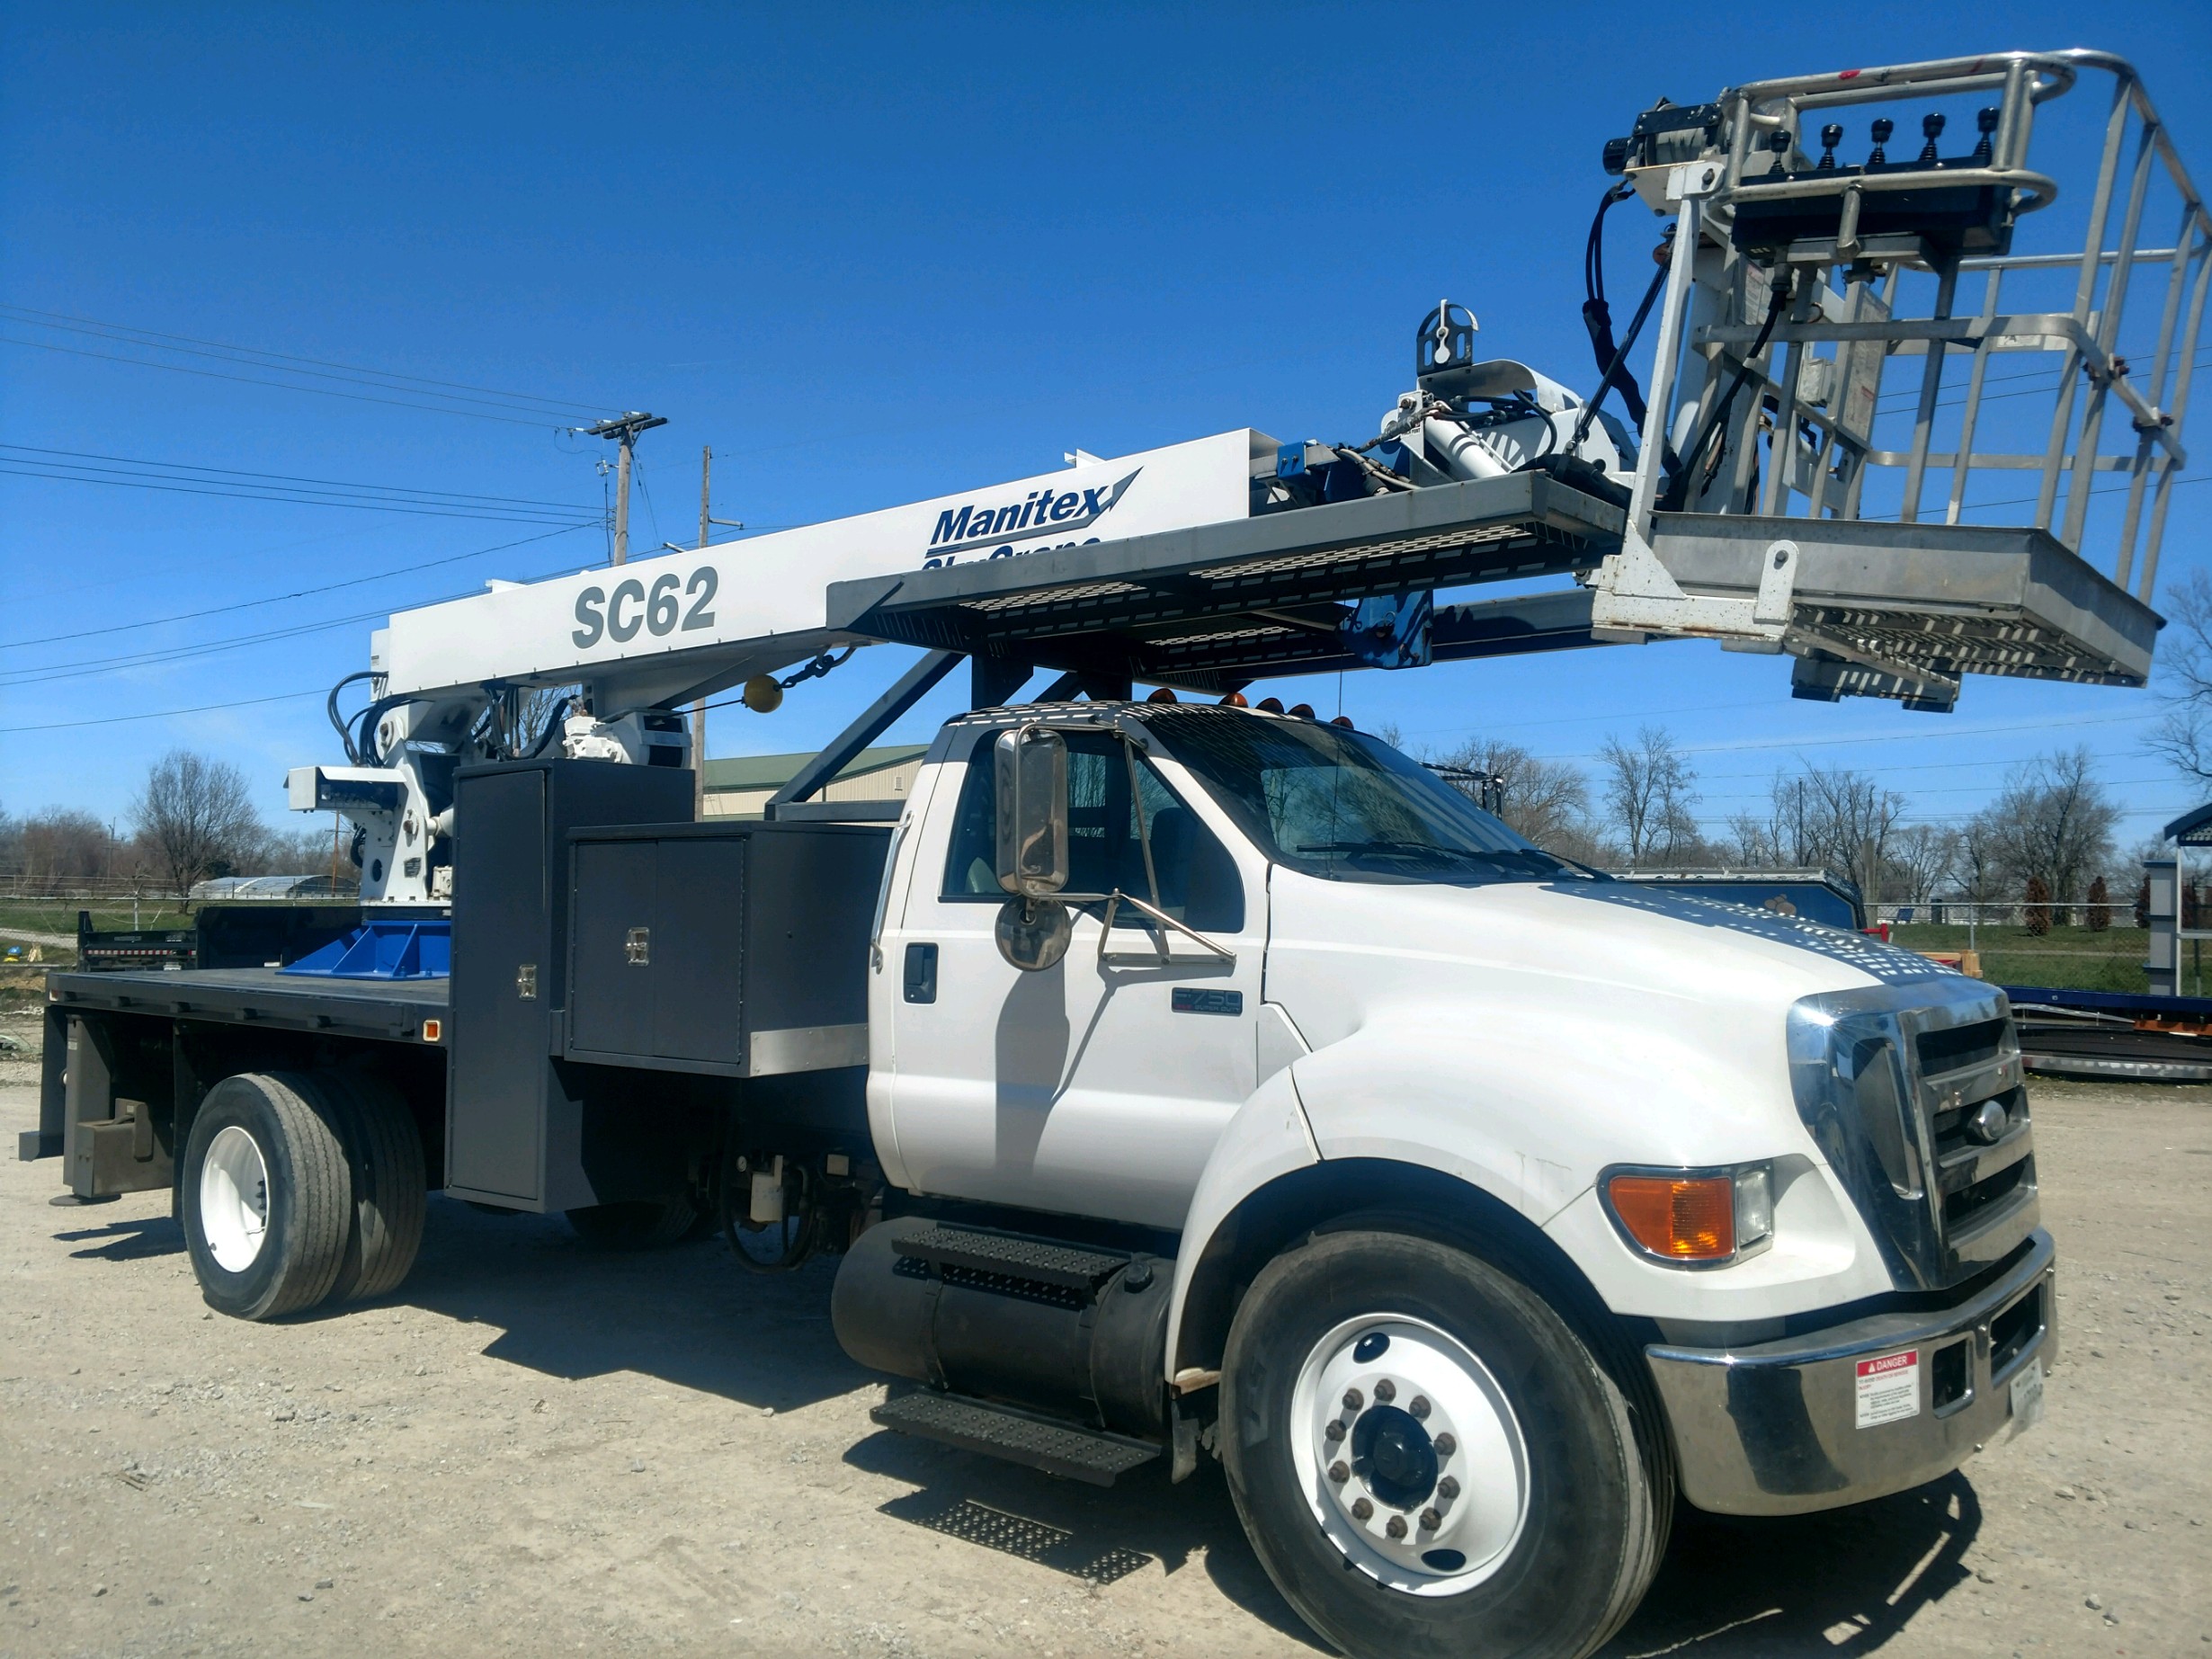 for sale: 2007 manitex sc62 on 2007 ford f750 low mileage